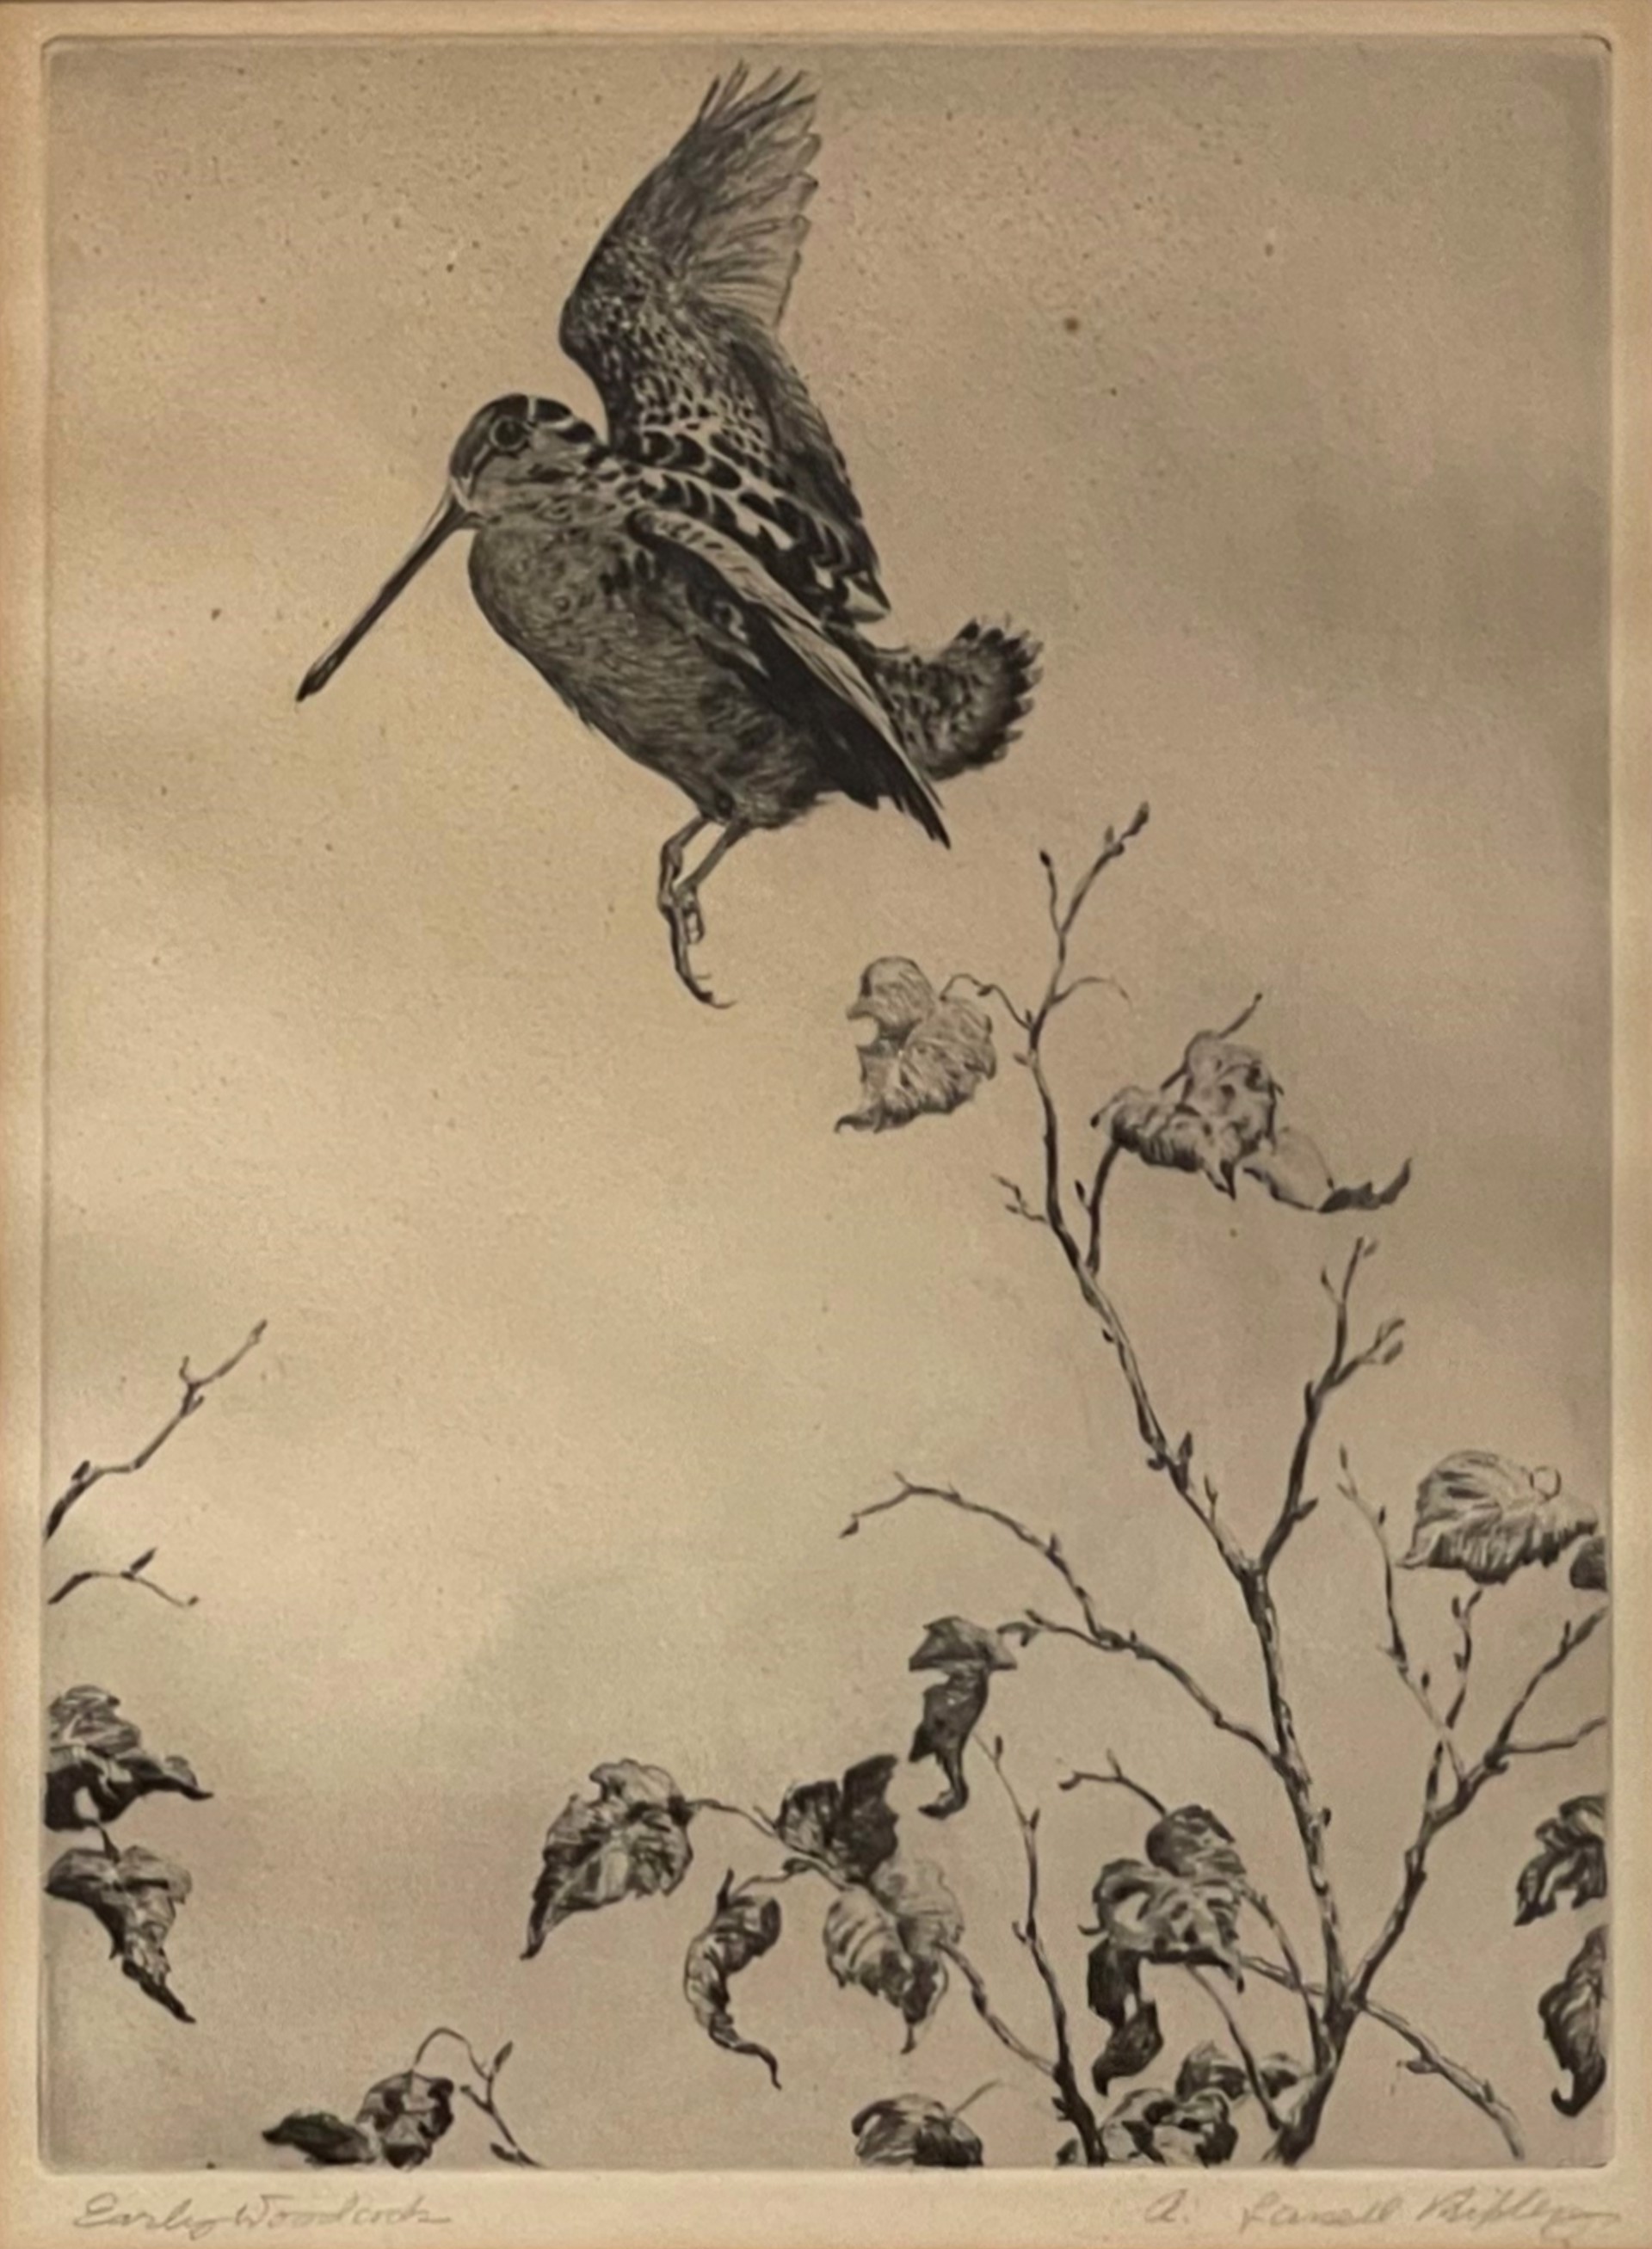 Flying Woodcock, Artist Proof by Aiden Lassell Ripley